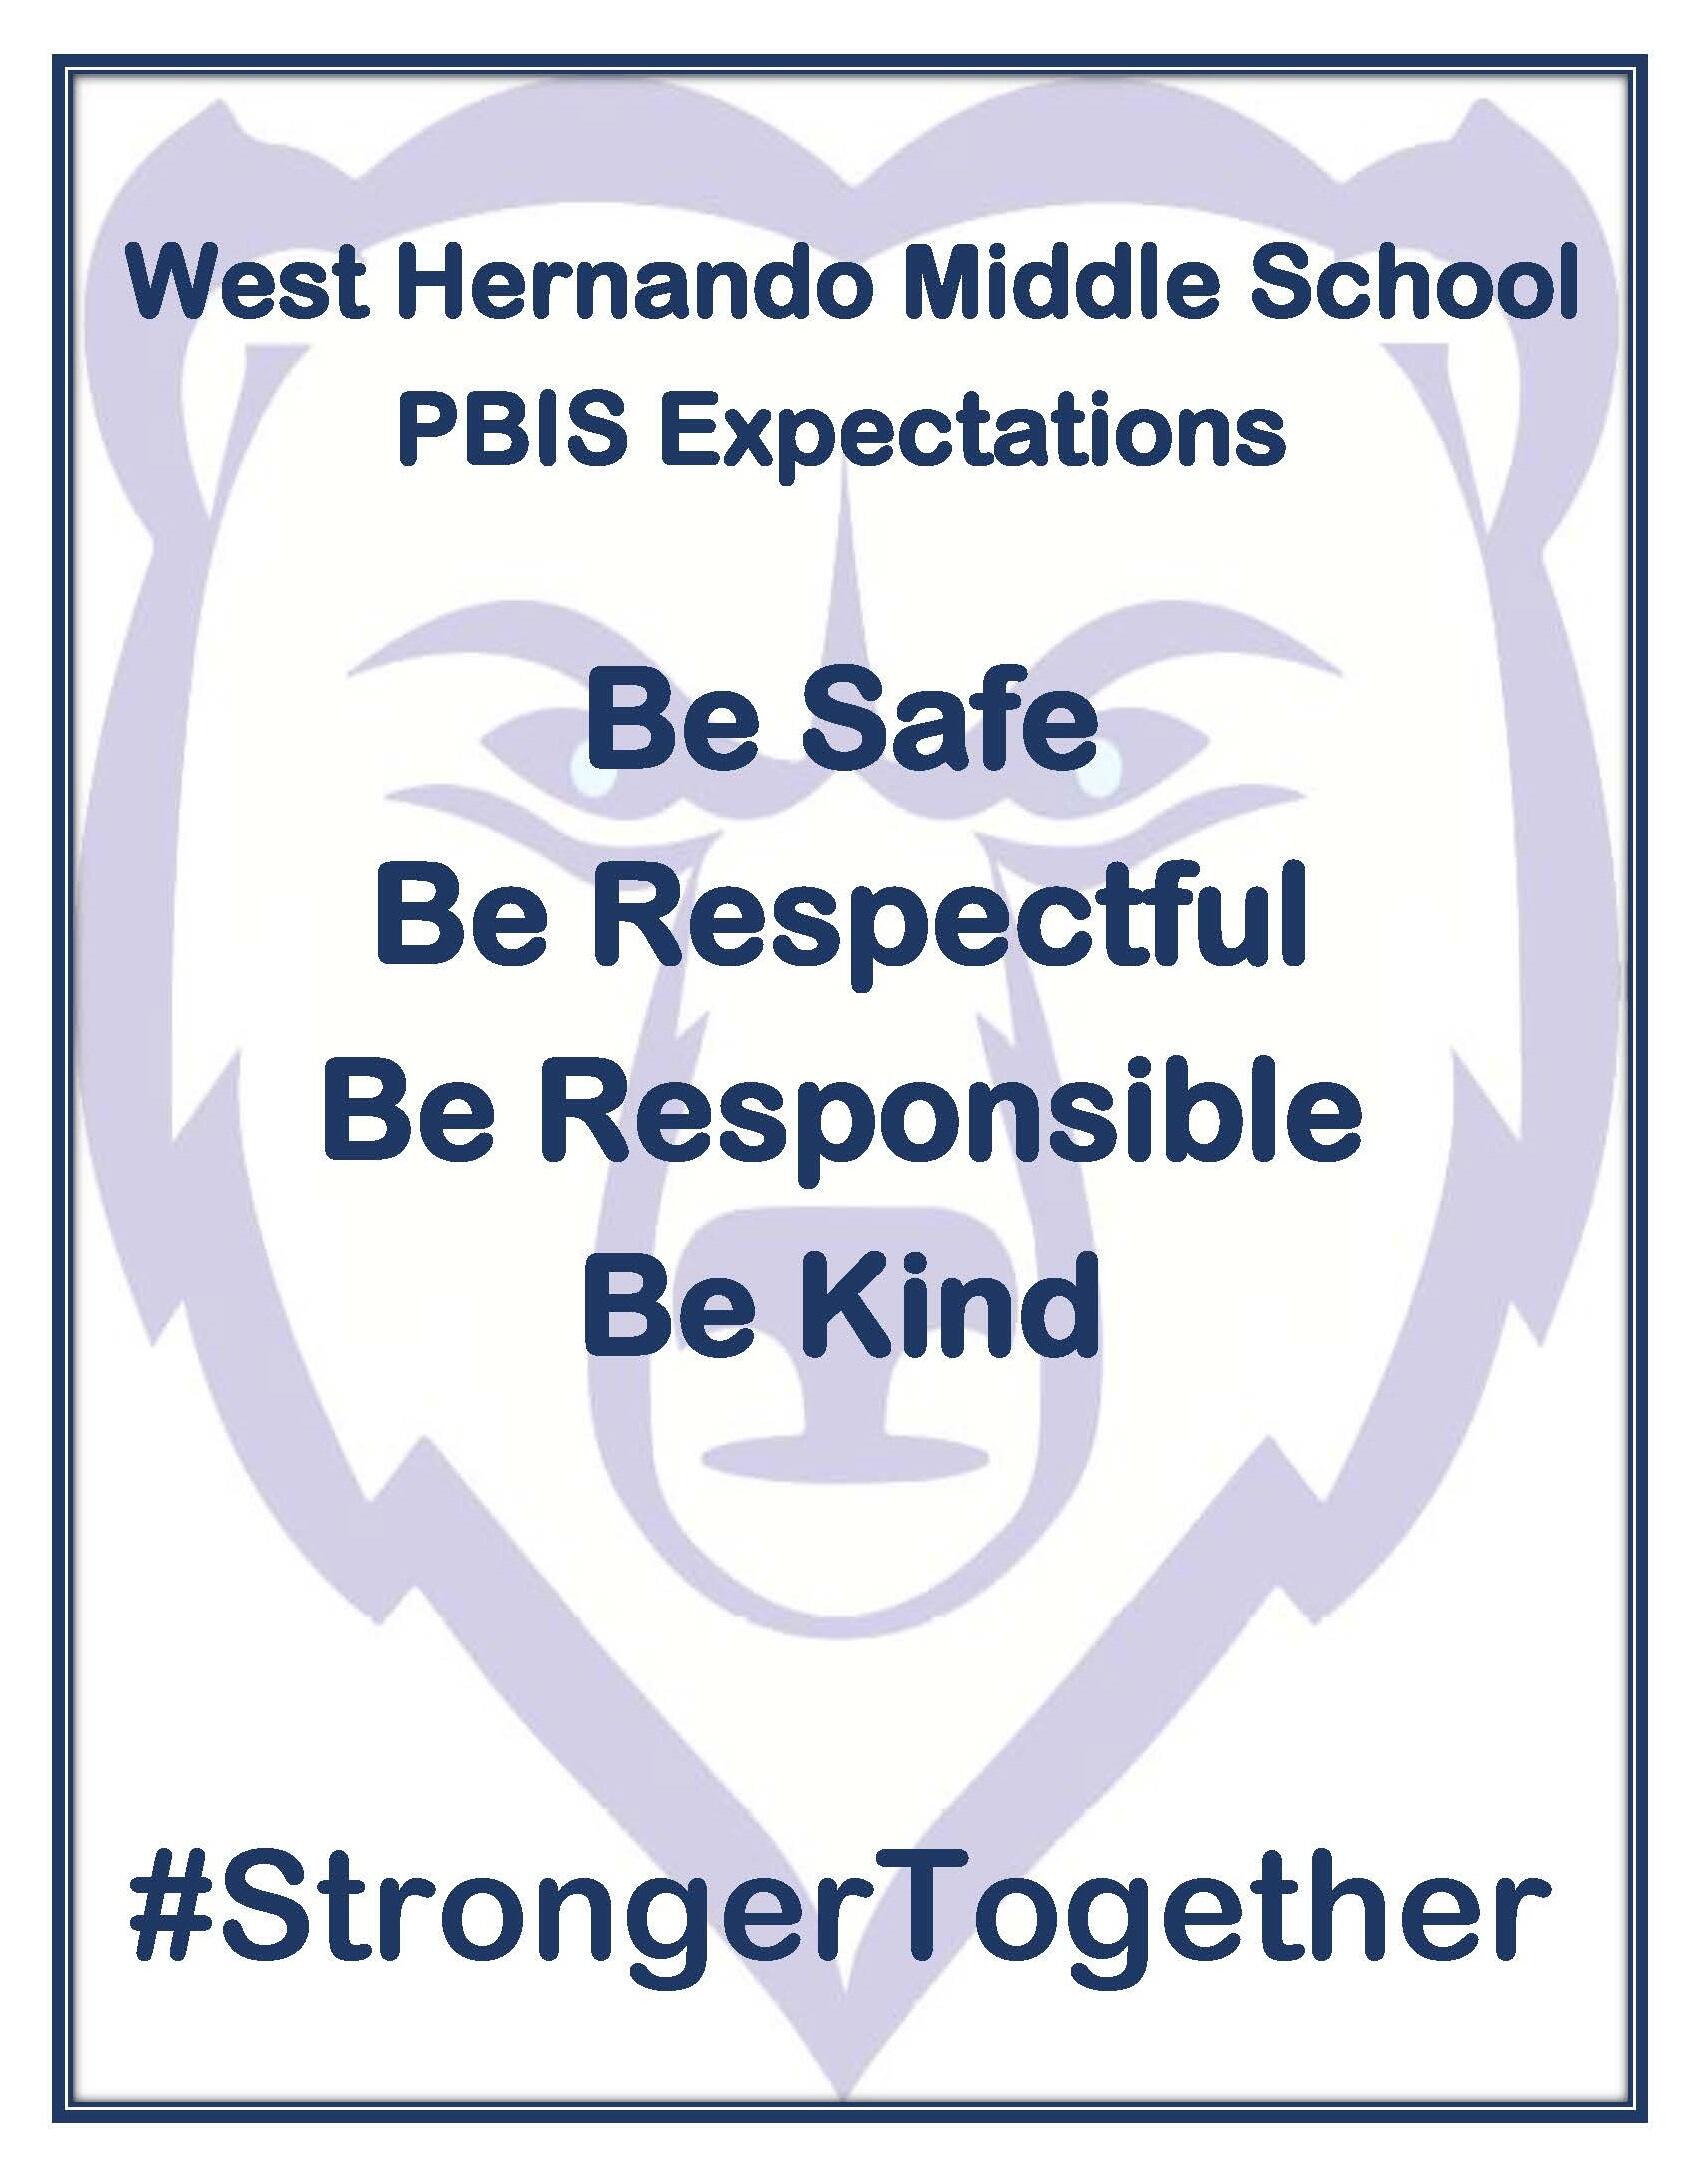 West Hernando Middle School PBIS Expectations: Be Safe, Be Respectful, Be Responsible, Be Kind